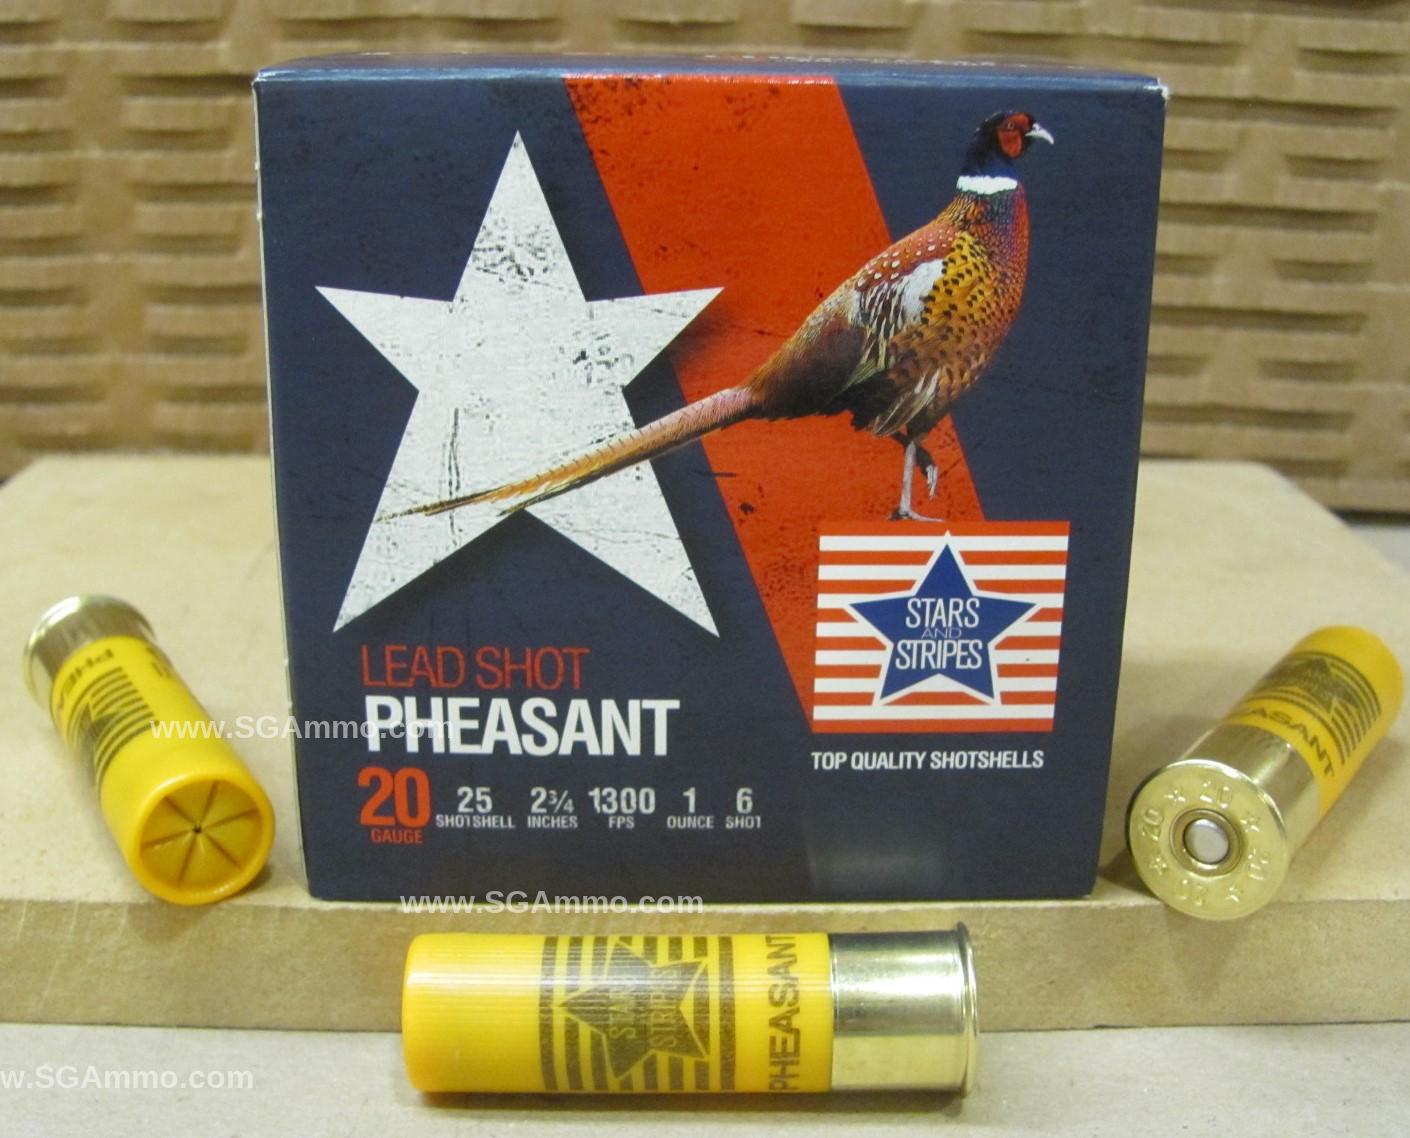 250 Round Case - 20 Gauge 2.75 Inch 1 Ounce Number 6 Lead Shot Pheasant Ammo by Stars and Stripes